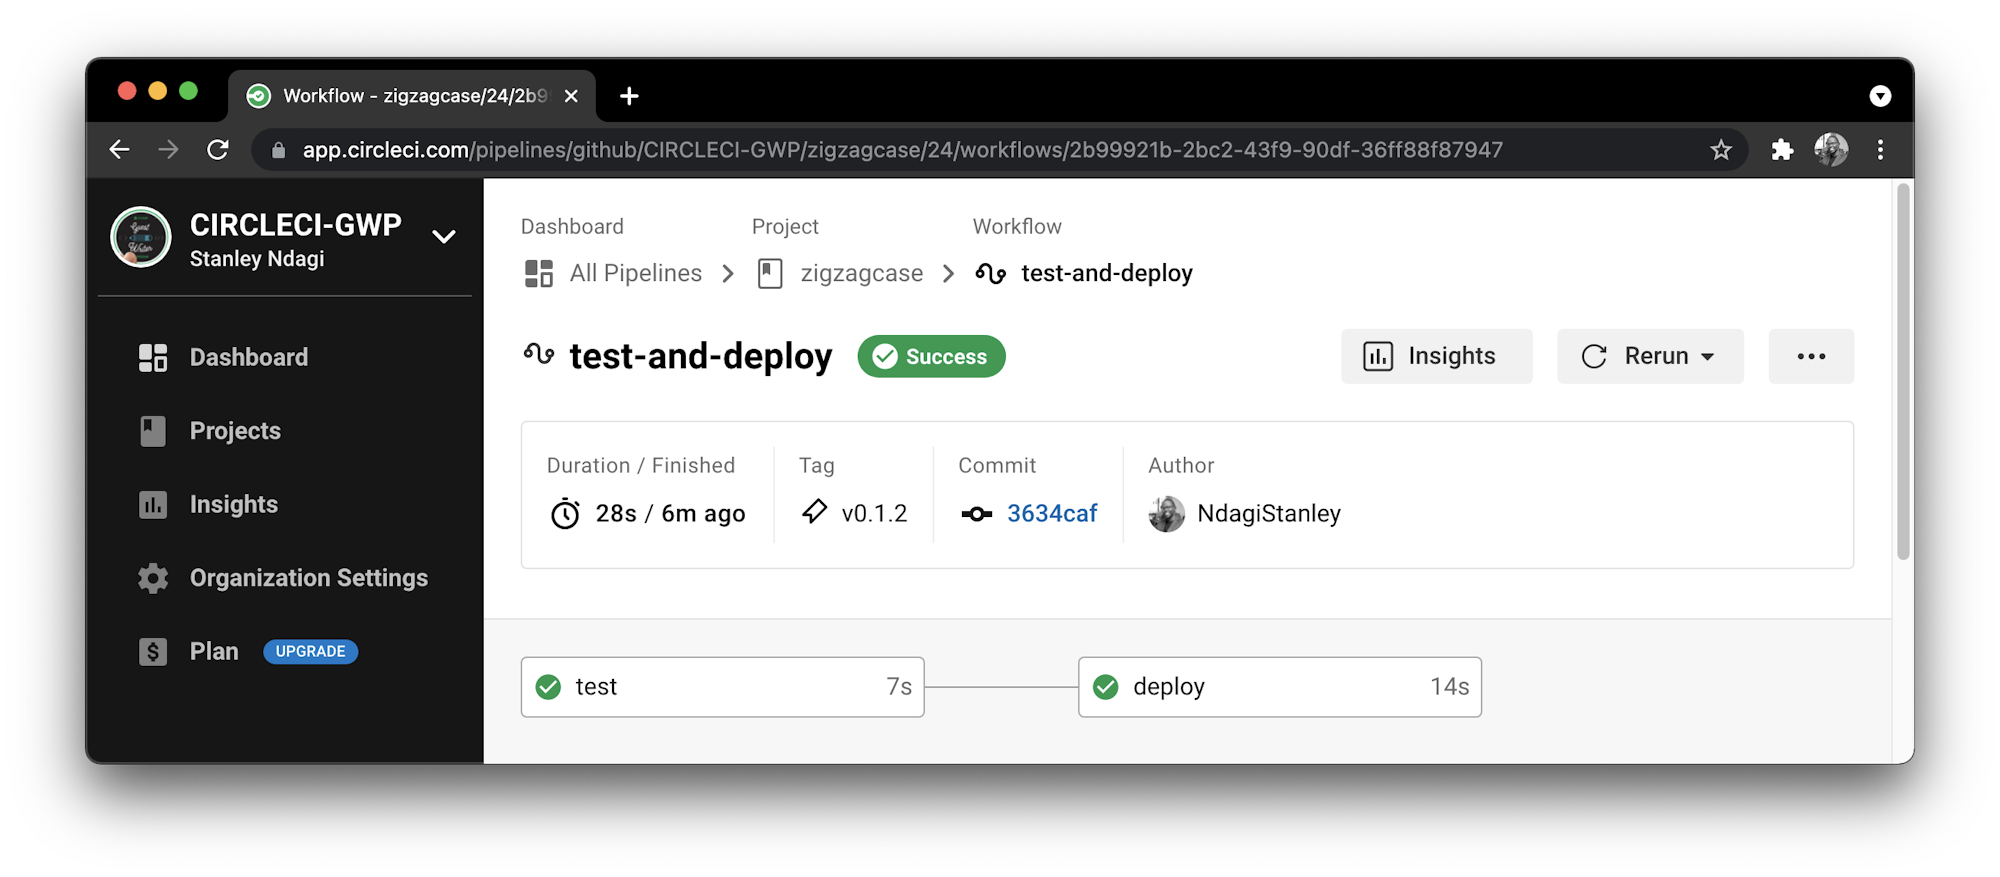 Successful test-and-deploy workflow on CircleCI